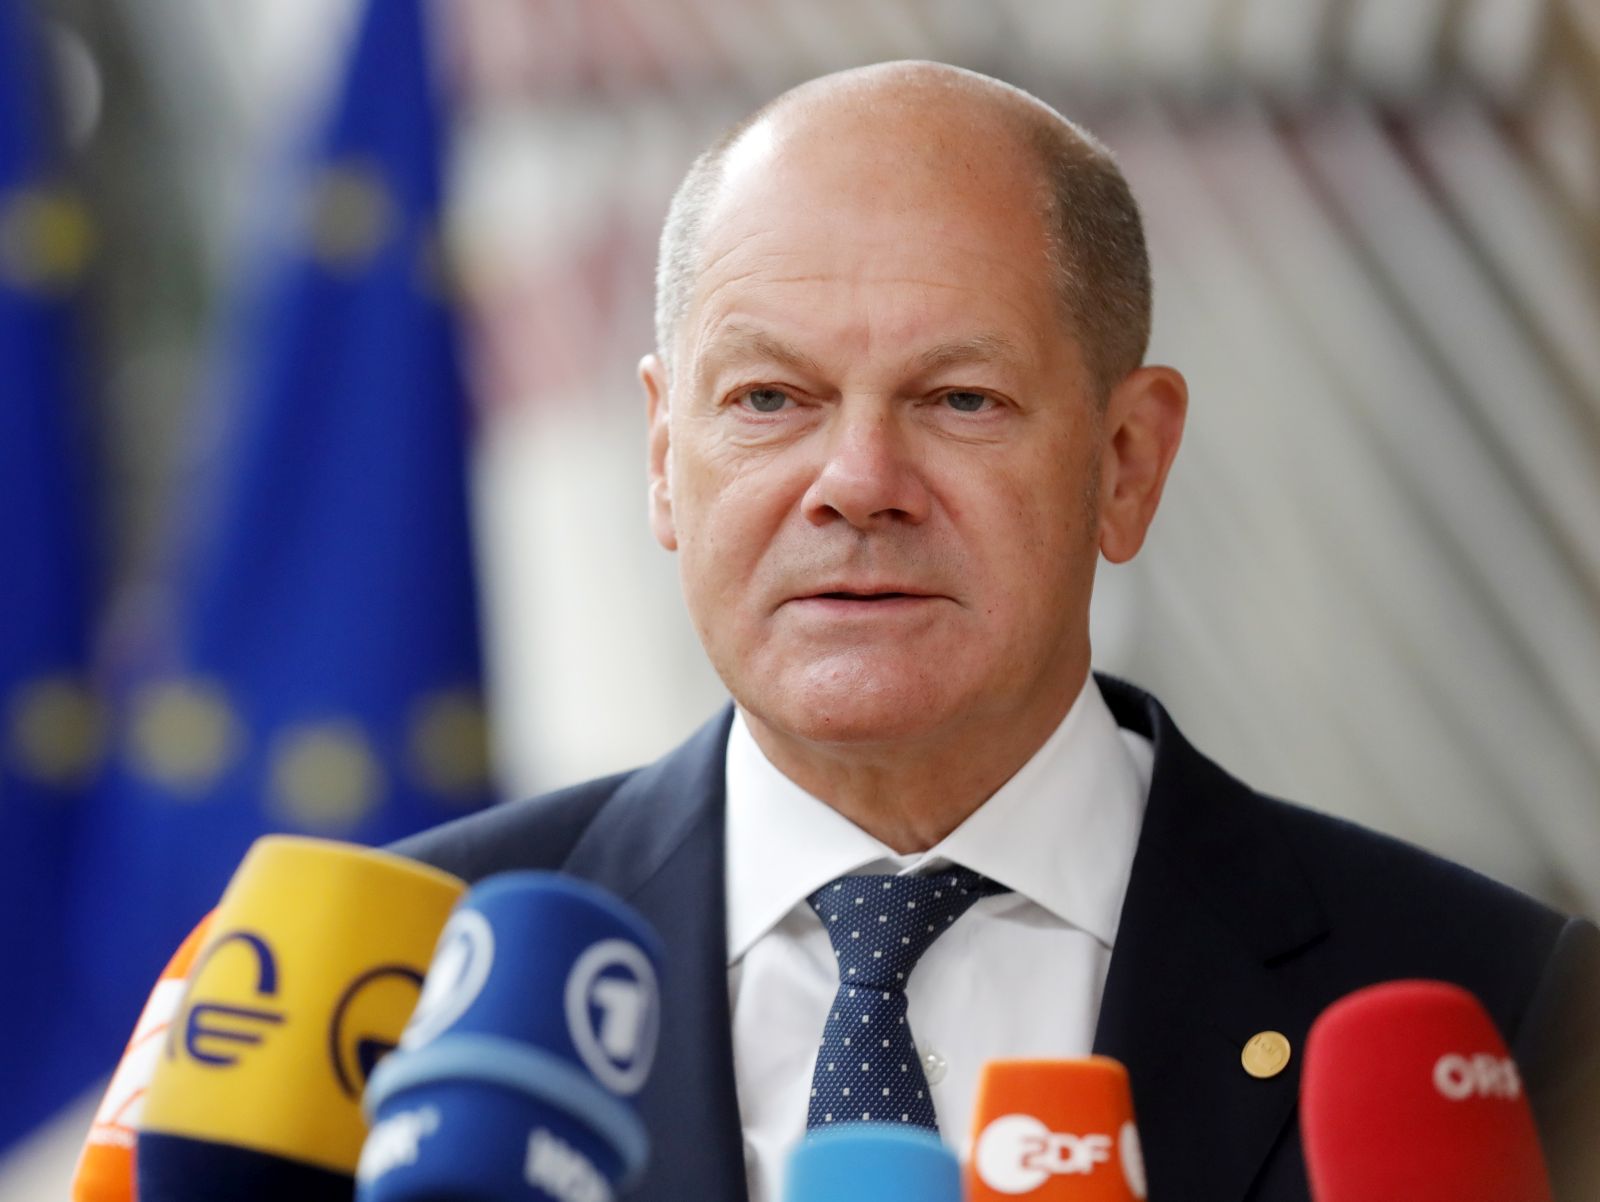 epa10029028 German Chancellor Olaf Scholz speaks to media as he arrives for an EU-Western Balkans leaders' meeting in Brussels, Belgium, 23 June 2022. The progress on EU integration and the challenges which the Western Balkans countries face in connection to the Russian invasion of Ukraine are topping the agenda when EU and Western Balkan leaders meet prior a European Council meeting.  EPA/STEPHANIE LECOCQ